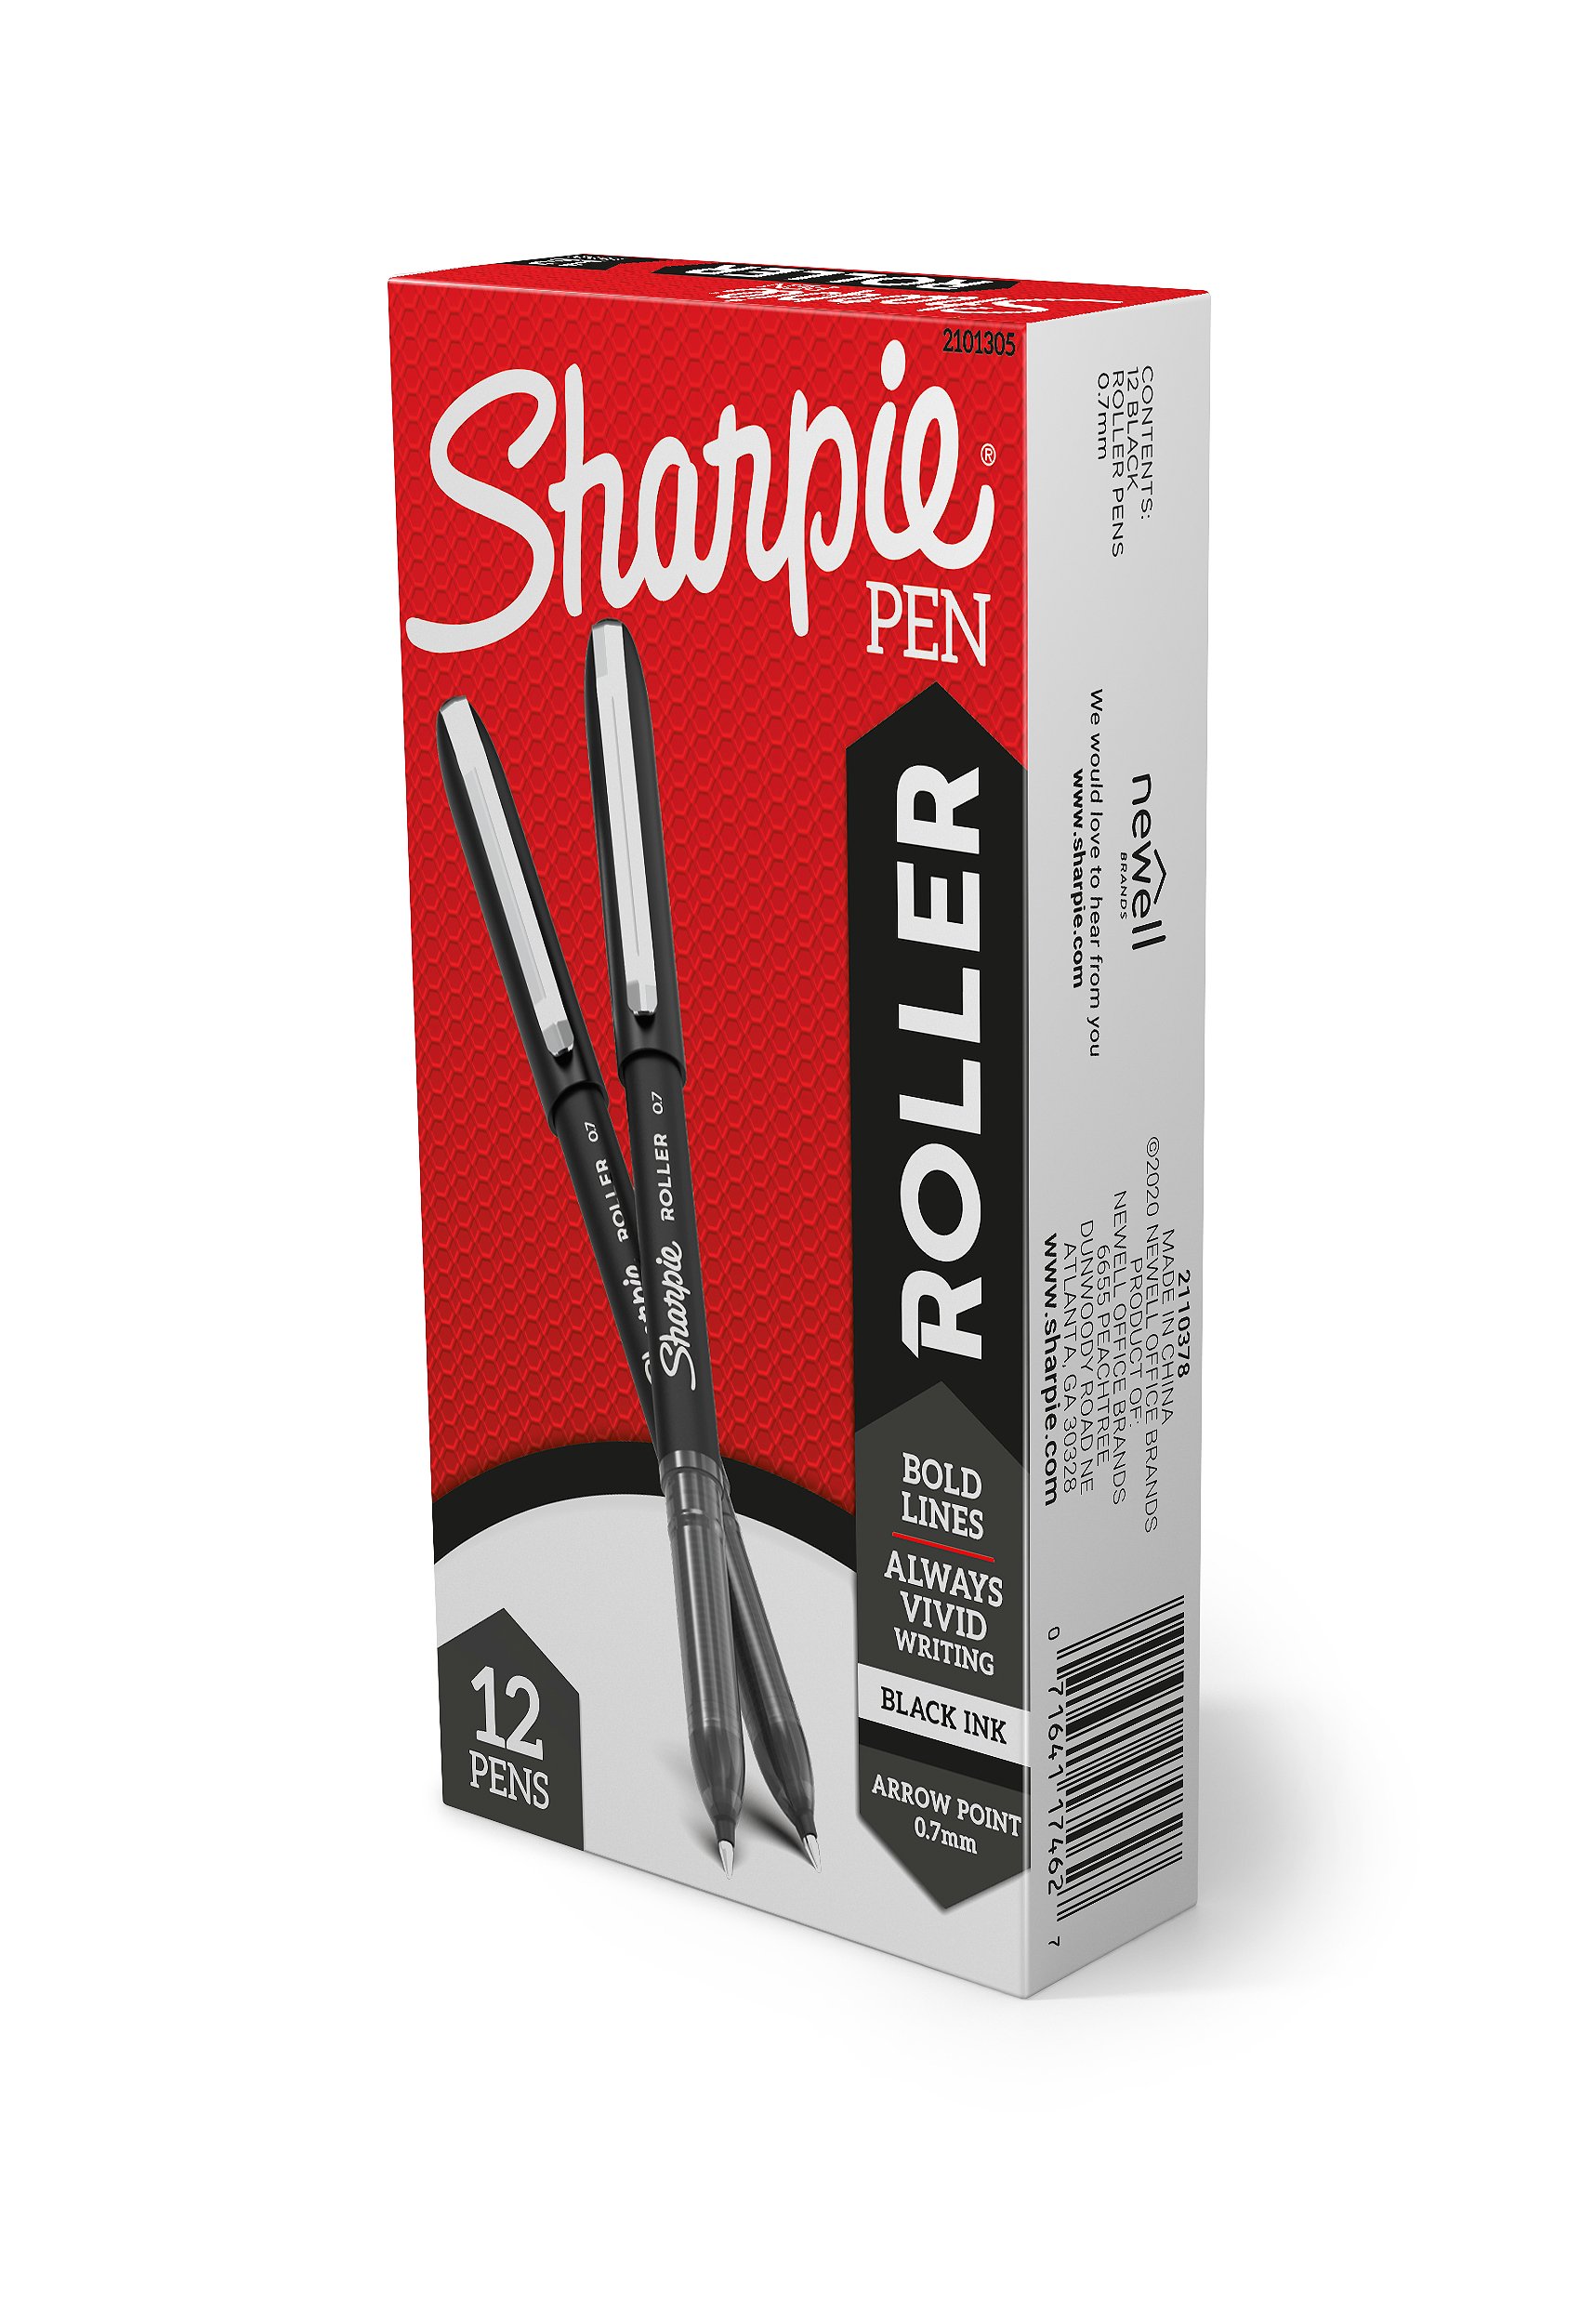 Sharpie Rollerball Pen, Needle Point Precision Pen, Black Ink, 8/Pack  (2116307)